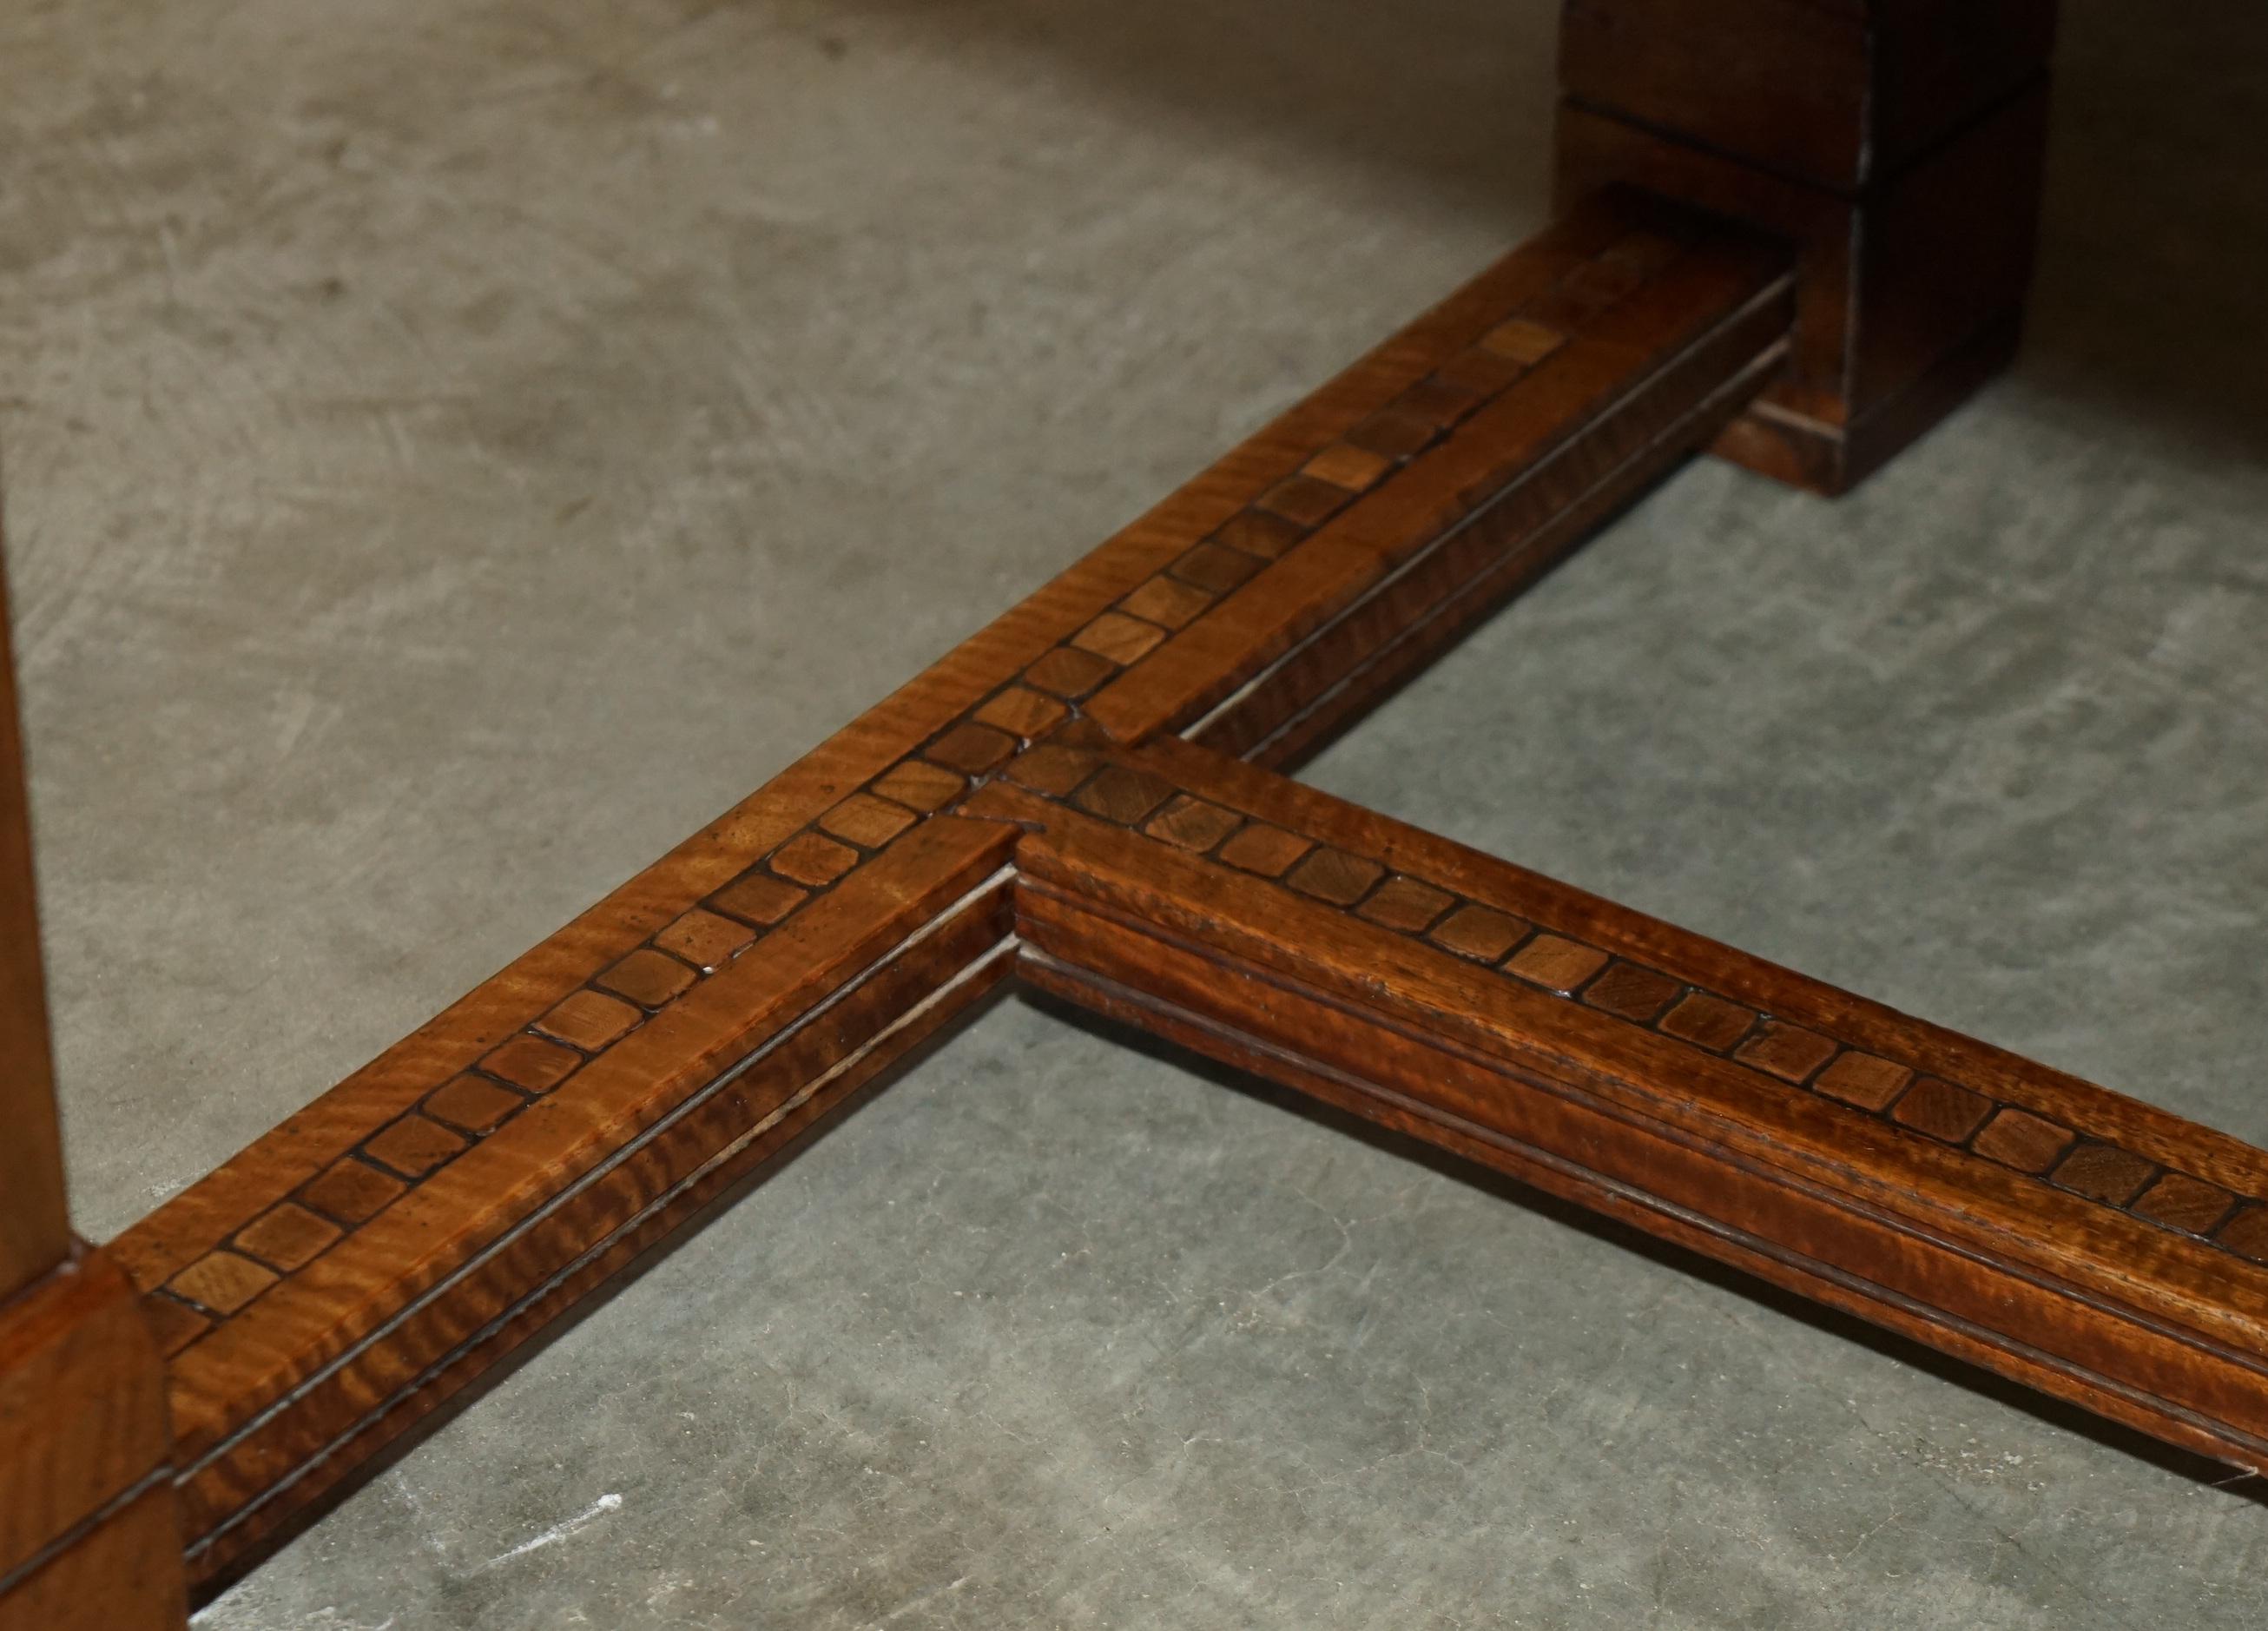 EXQUISITE ViNTAGE OYSTER VENEER & PARQUETRY INLAID REFECTORY DINING TABLE For Sale 1